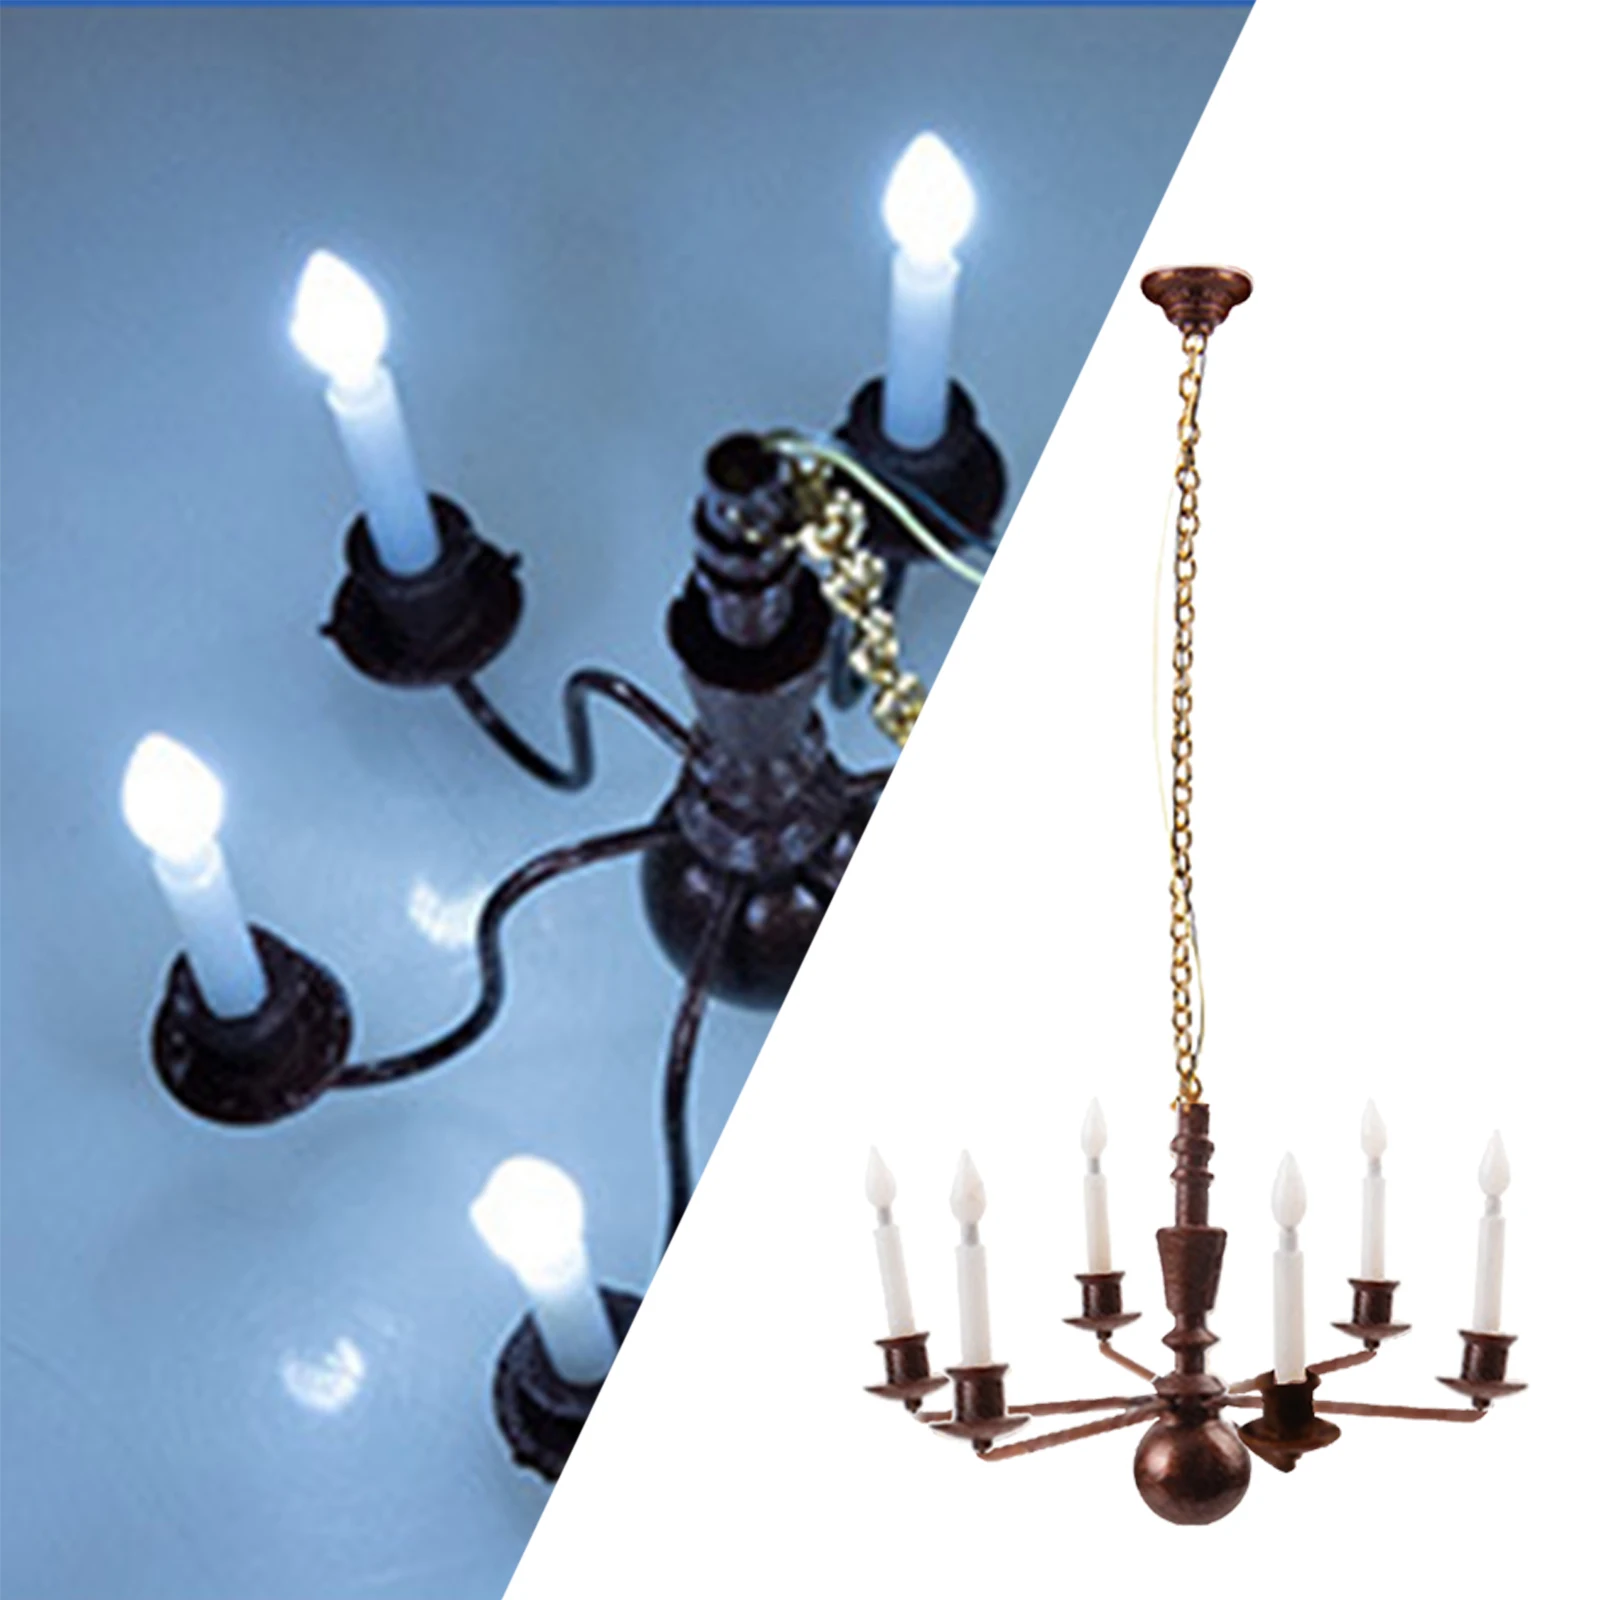 Classic Metal 1:87 HO Scale Ceiling Light Hanging Chandelier DIY Model Toy